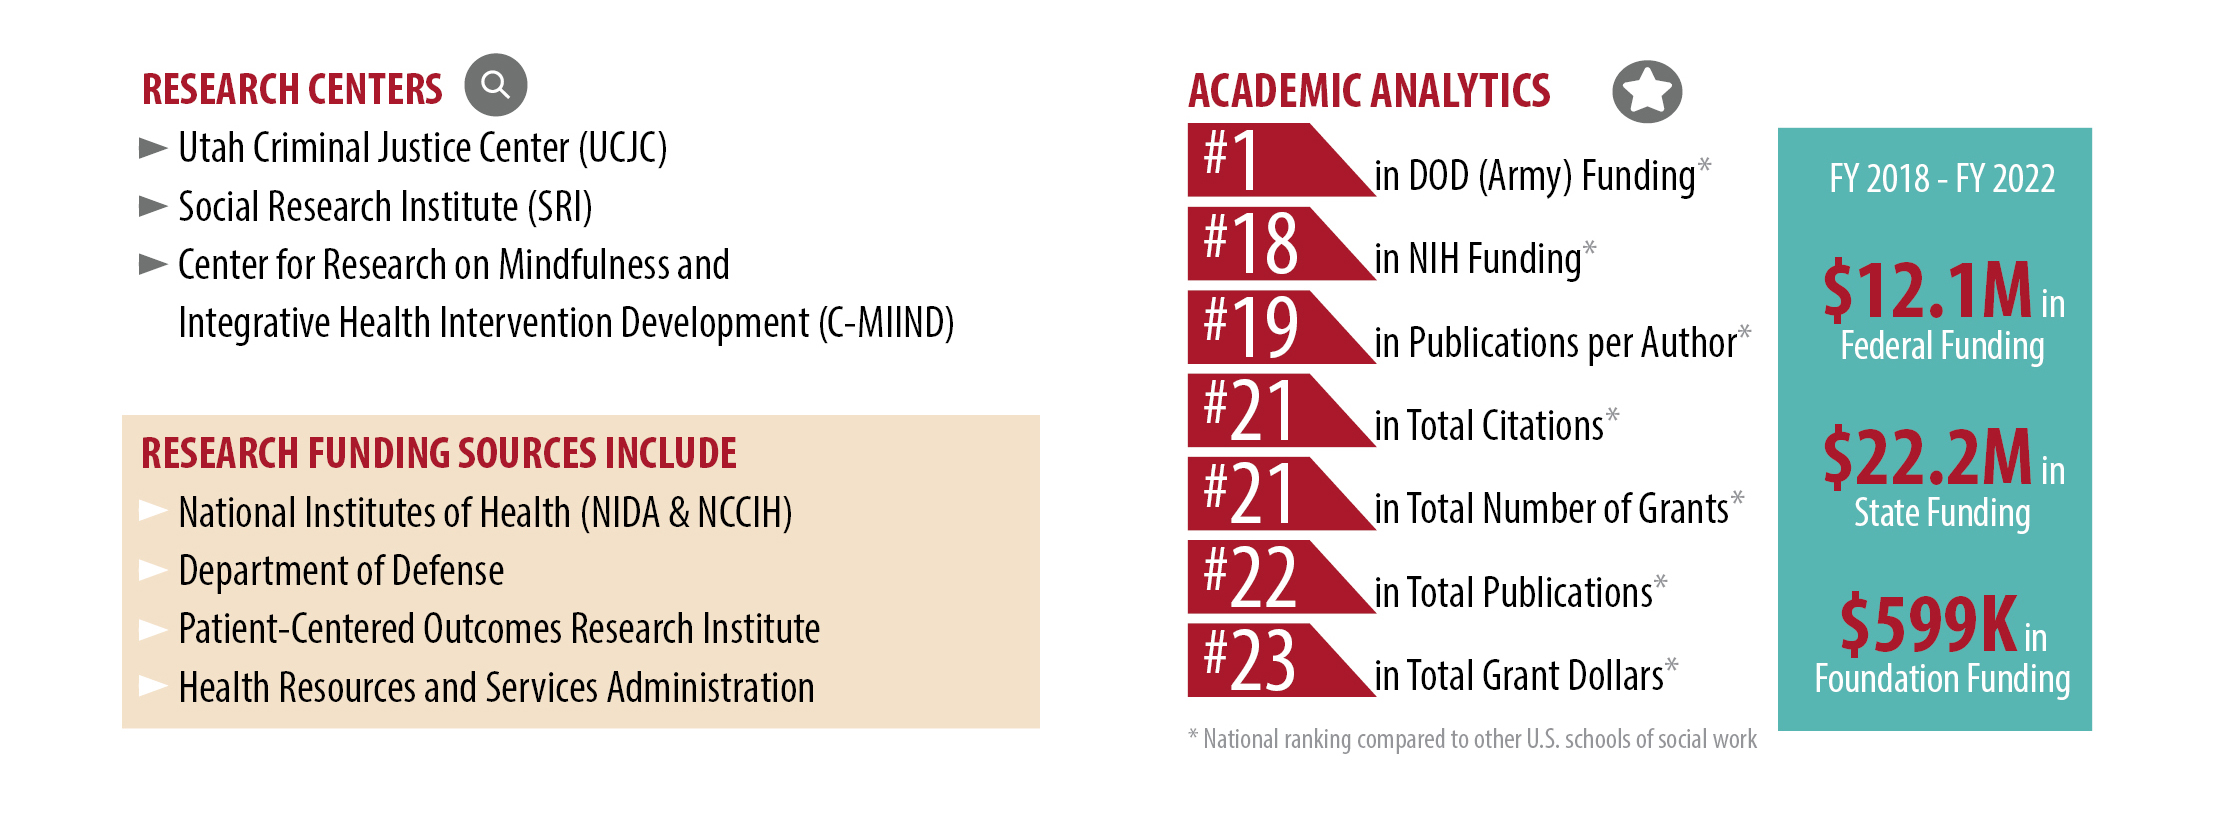 Statistical information about the research and funding of the College of Social Work in the 2022 calendar year.